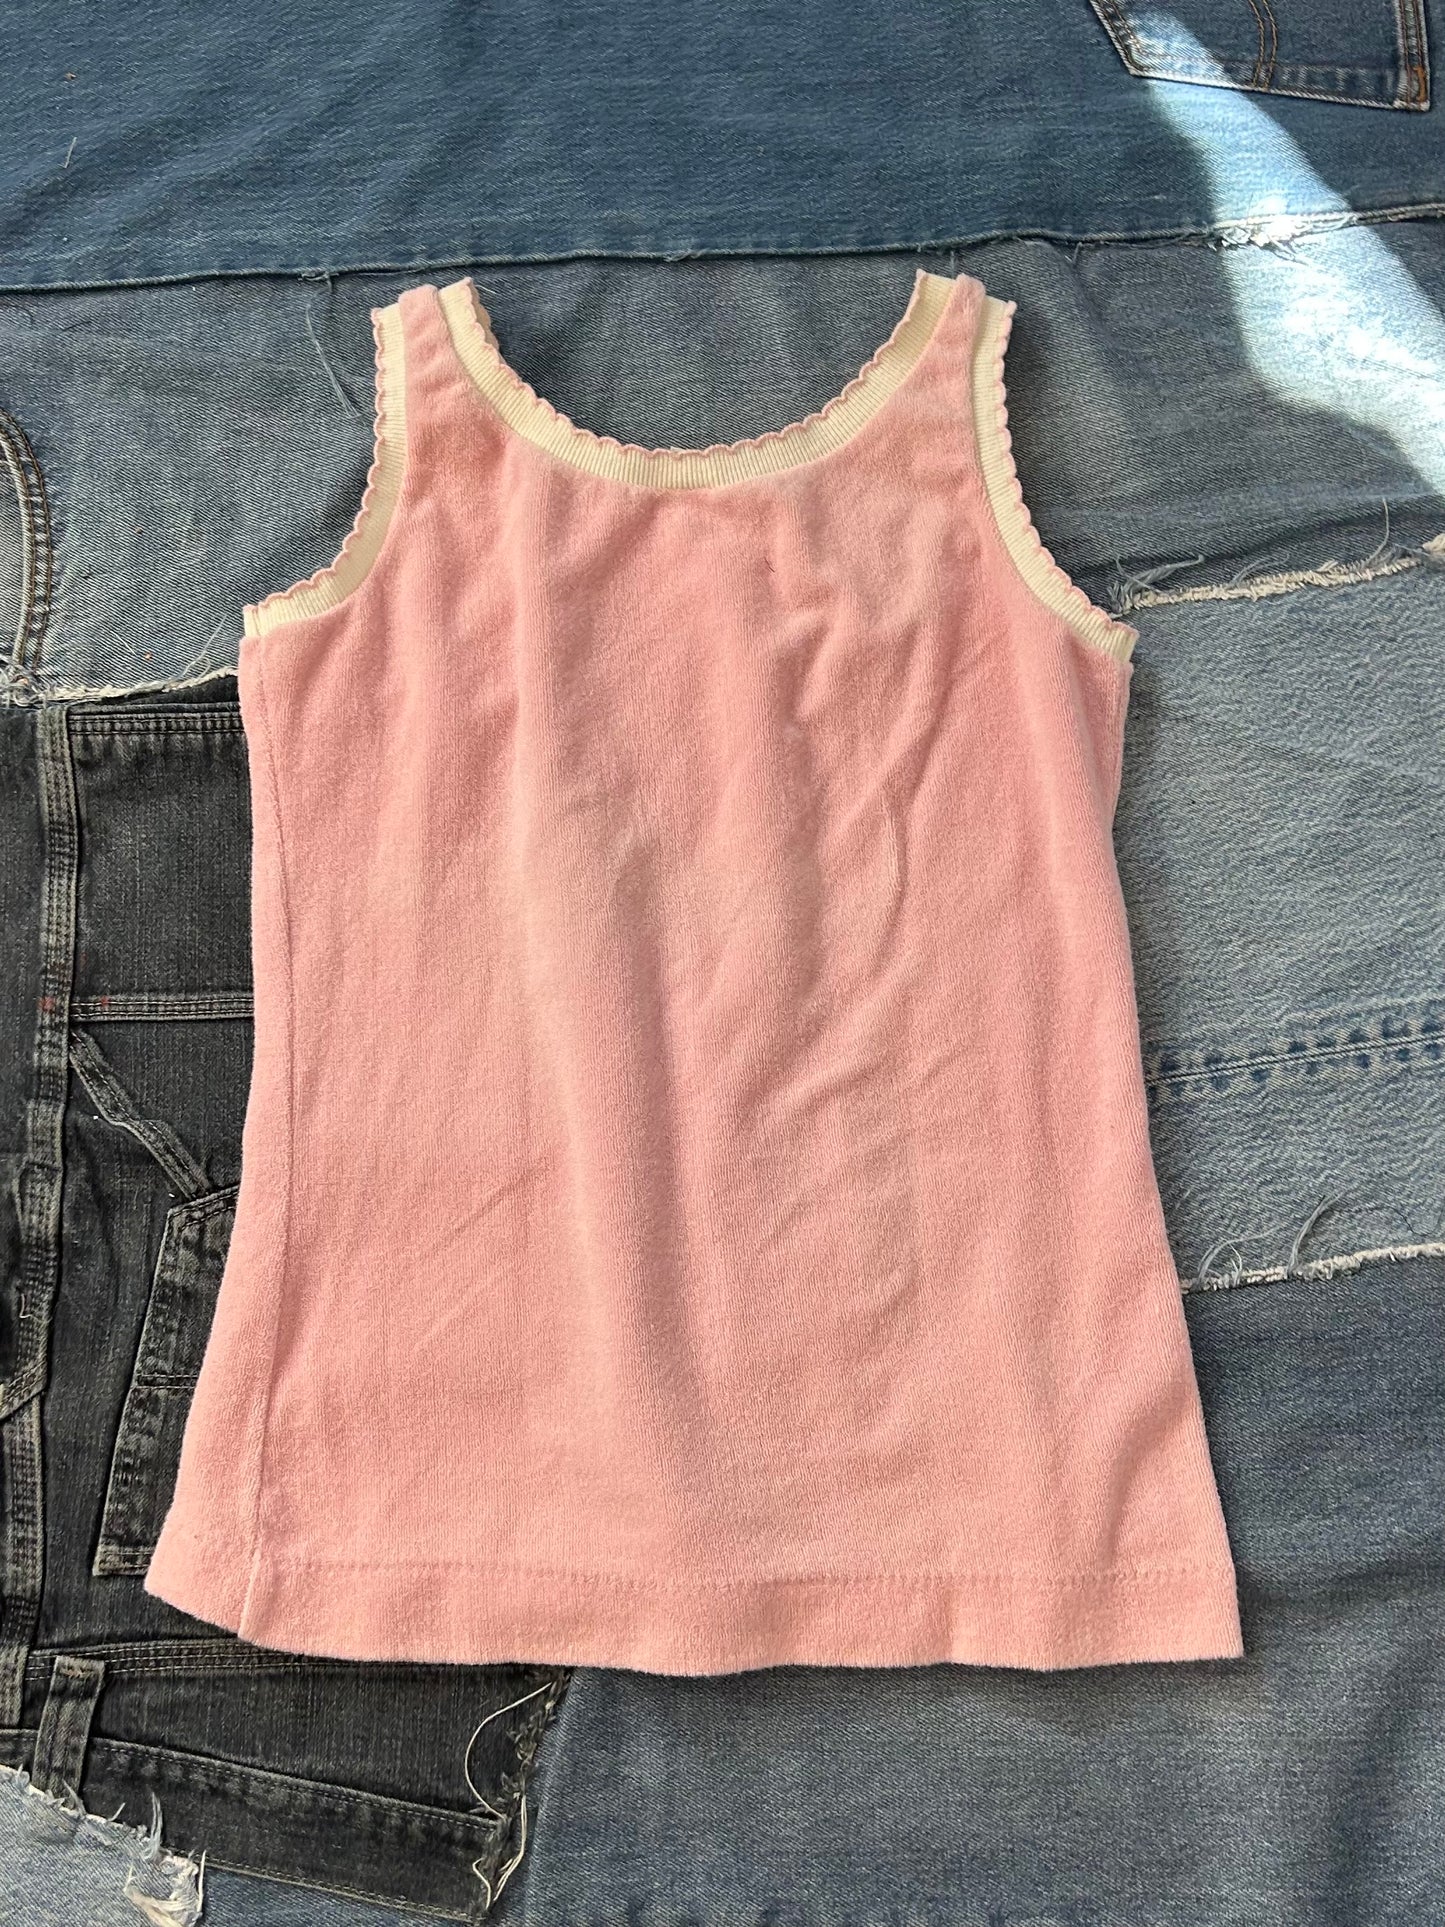 Pink and White tank